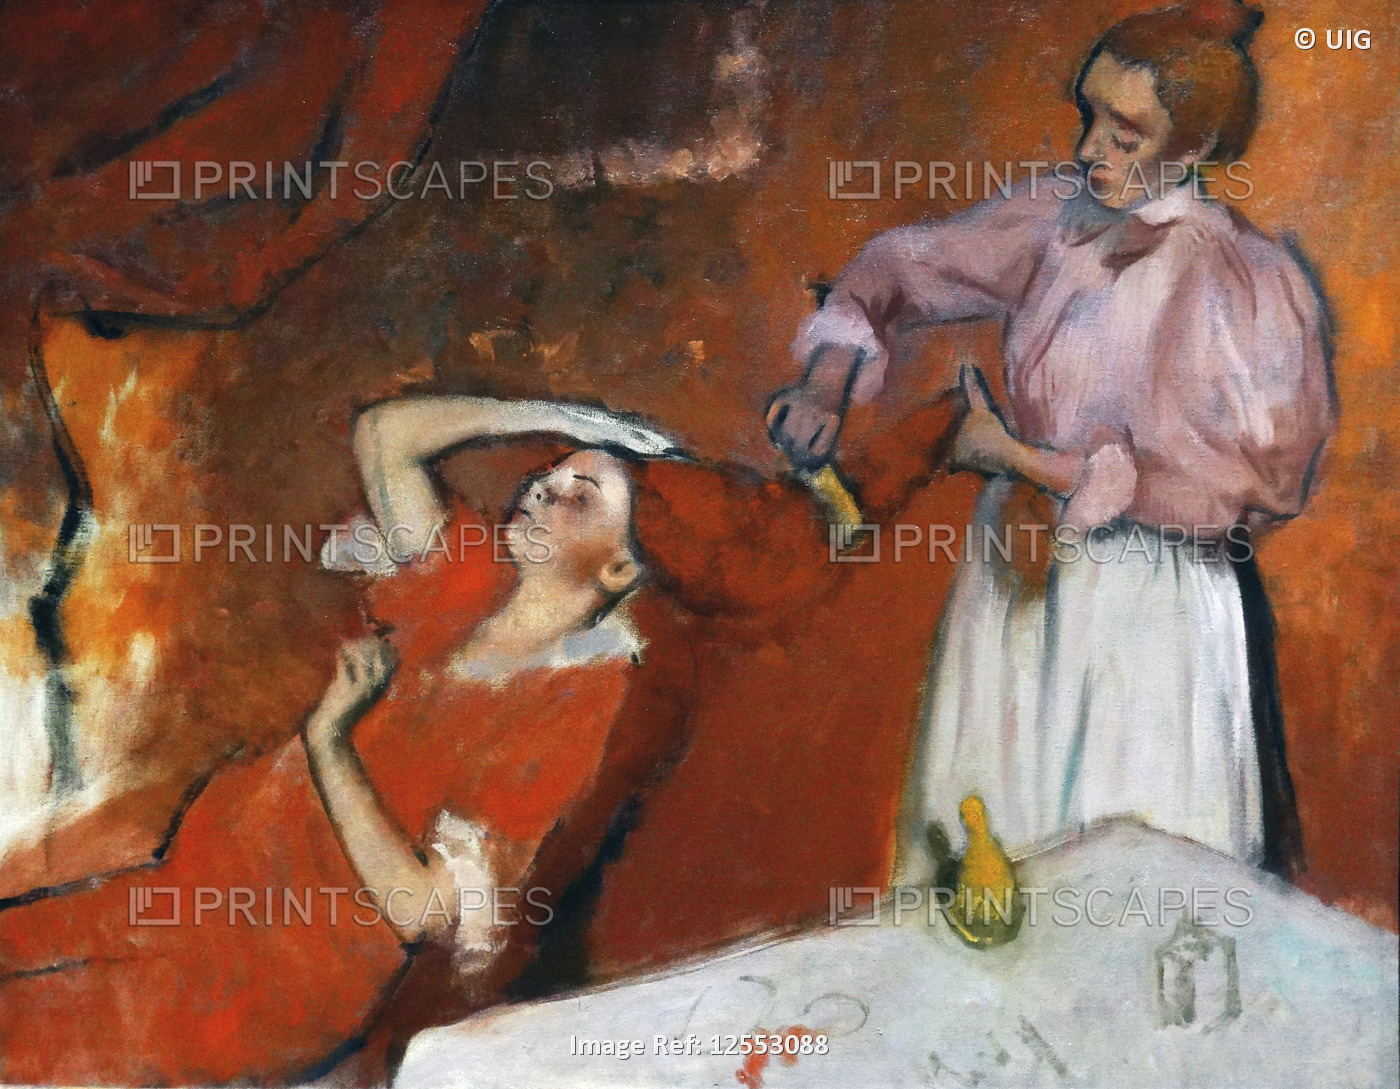 Painting titled 'Combing the Hair (La Coiffure)' by Edgar Degas, 19th century